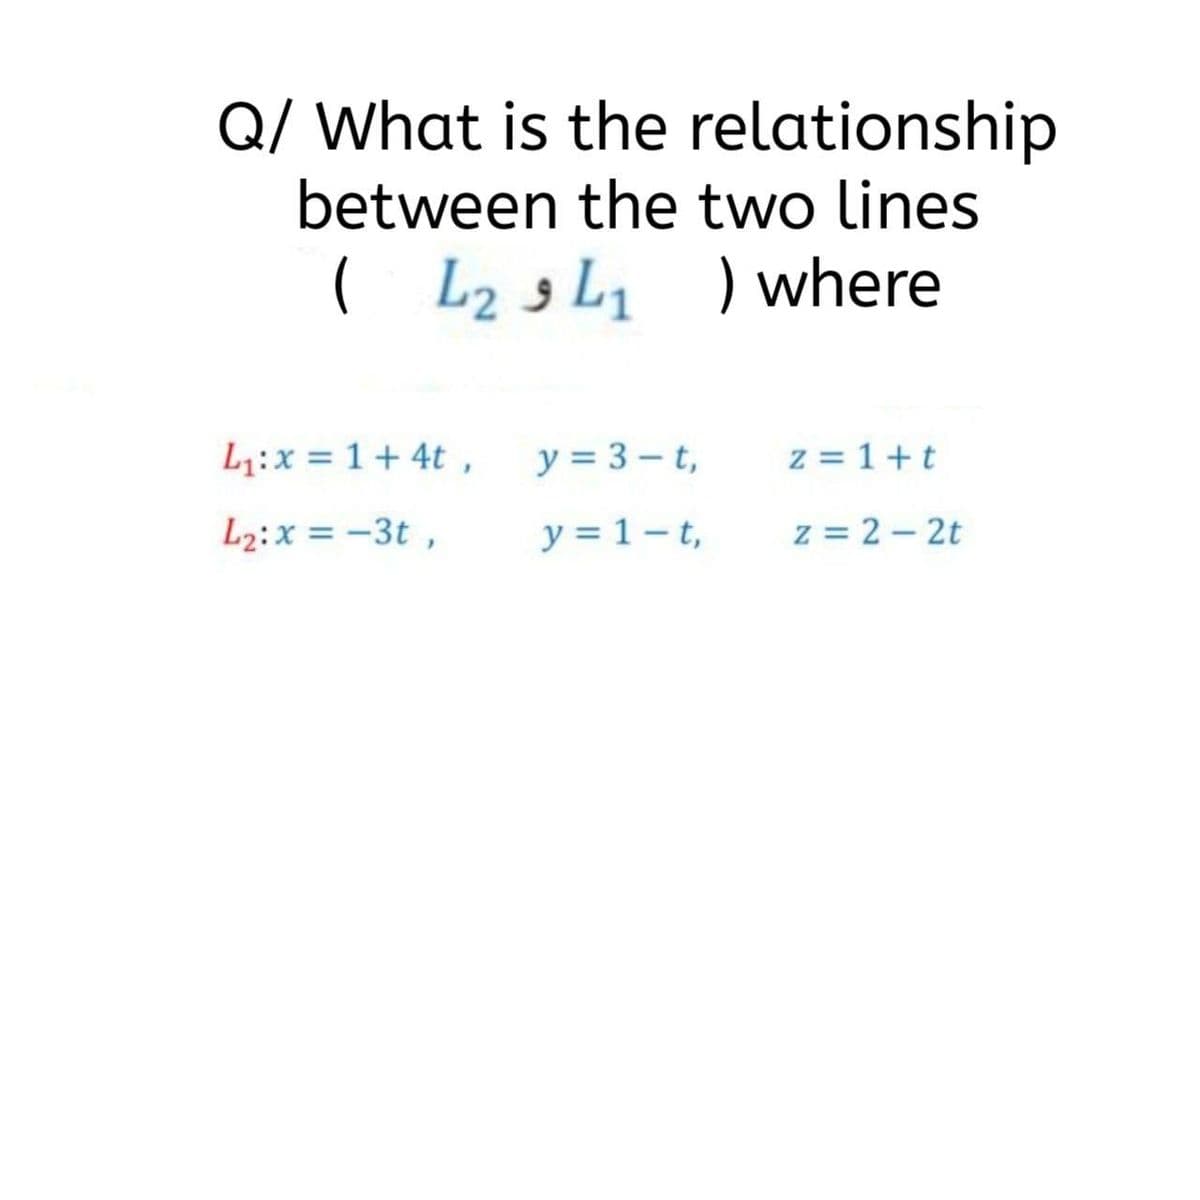 Q/ What is the relationship
between the two lines
( L23 L, ) where
L1:x = 1+ 4t ,
y = 3 – t,
z = 1+t
L2:x = -3t ,
y = 1- t,
z = 2 - 2t
